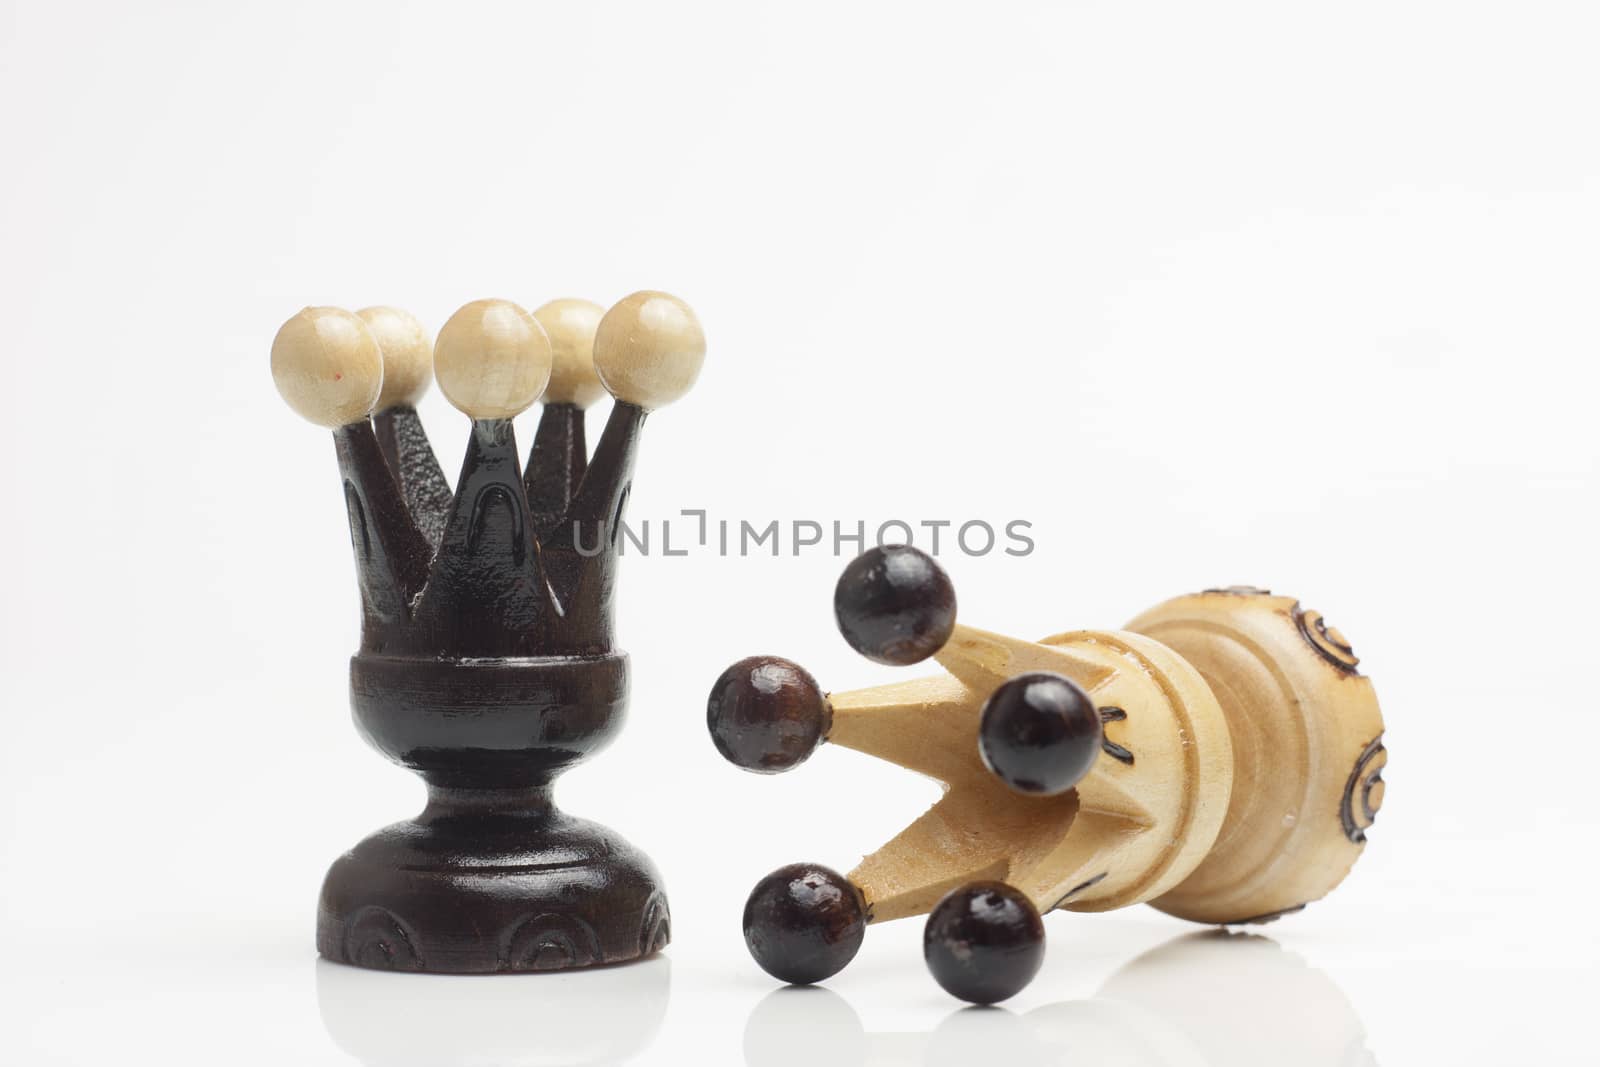 Two wooden chess pieces alone by mailos